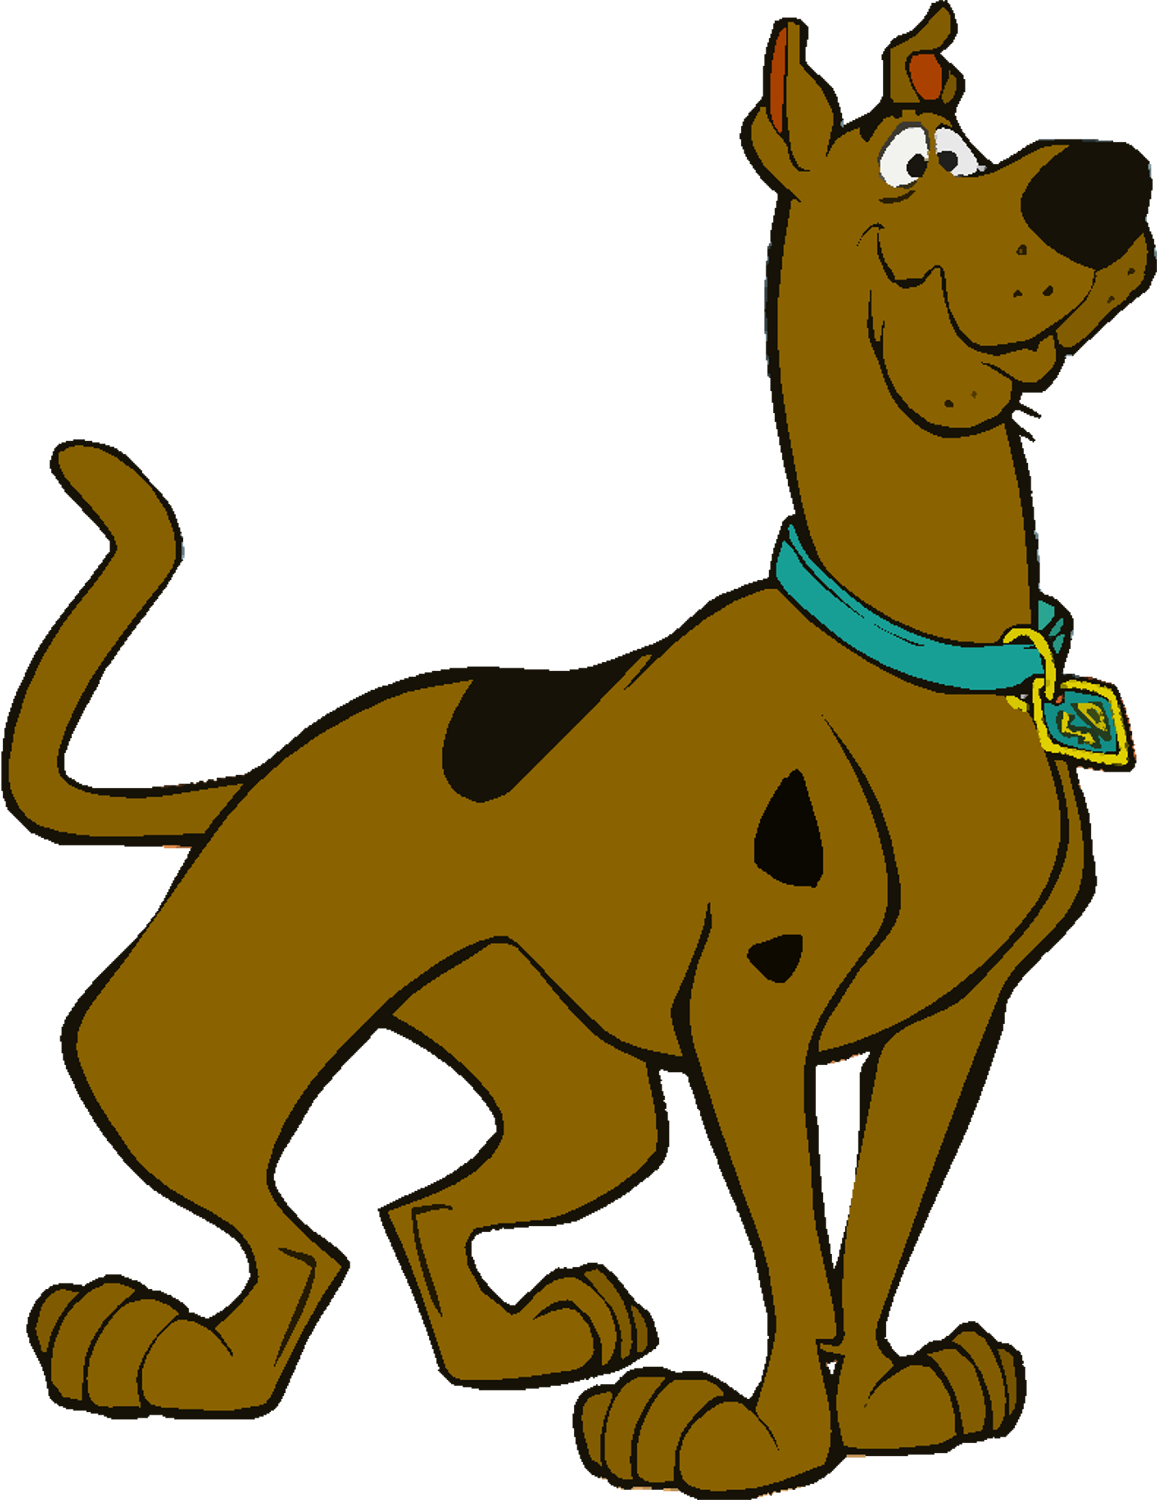 Scooby Doo Images Scooby Doo Hd Wallpaper And Background - Scooby From Scooby Doo (1157x1500), Png Download